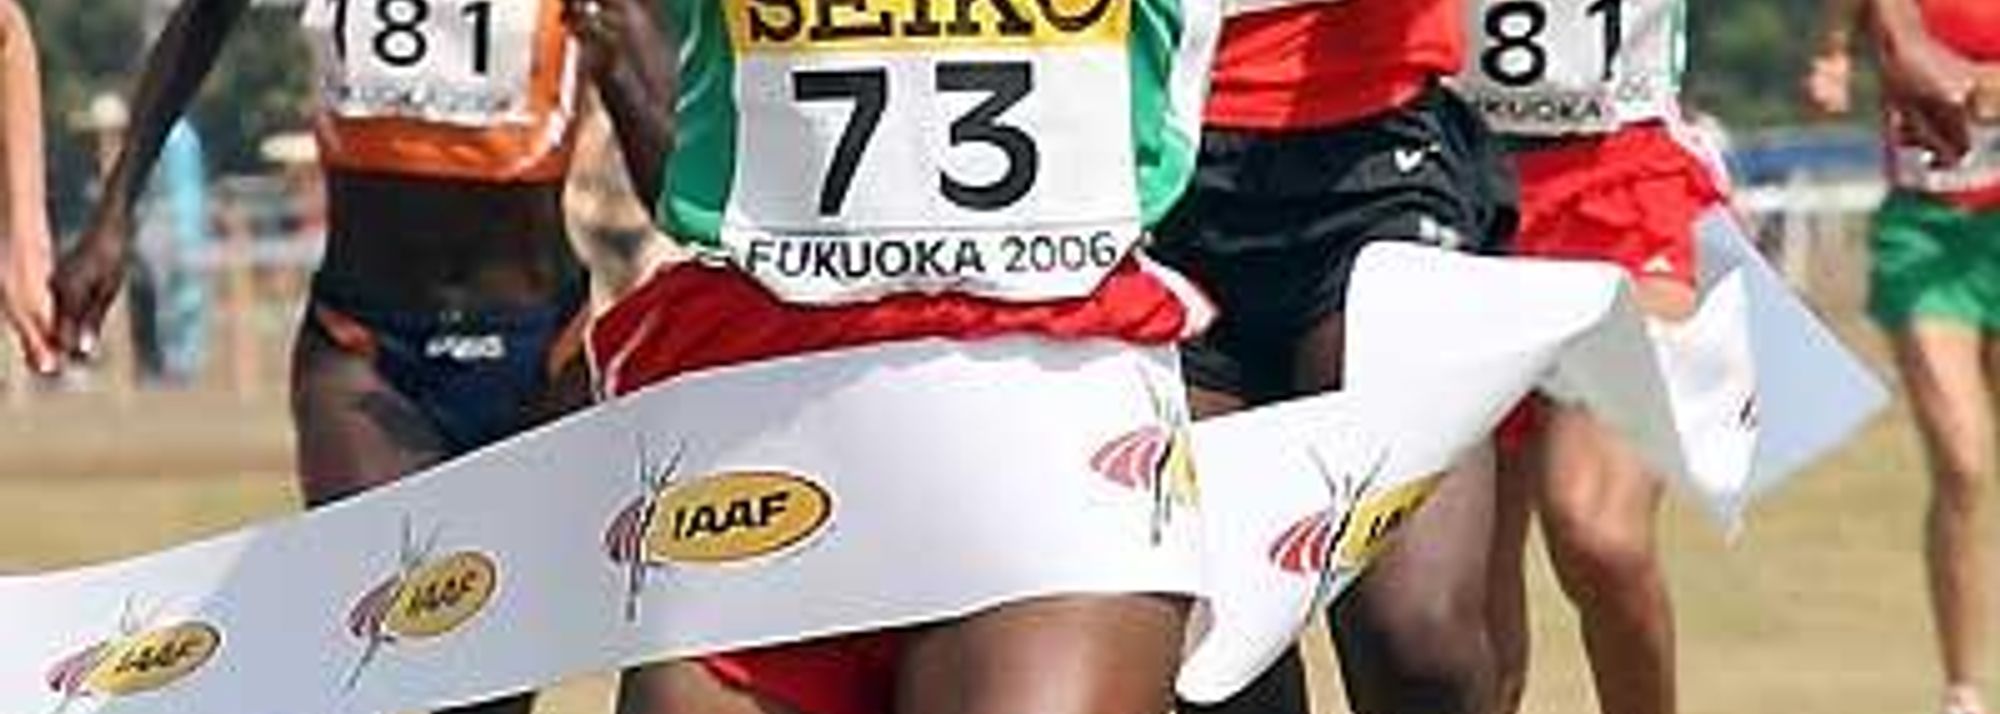 Last year’s World Junior Cross Country champion Gelete Burika Bati today succeeded in adding the senior women’s short race crown despite gale force winds which blasted the course which is situated on the Fukuoka’s flat shore on the Genkai Sea.